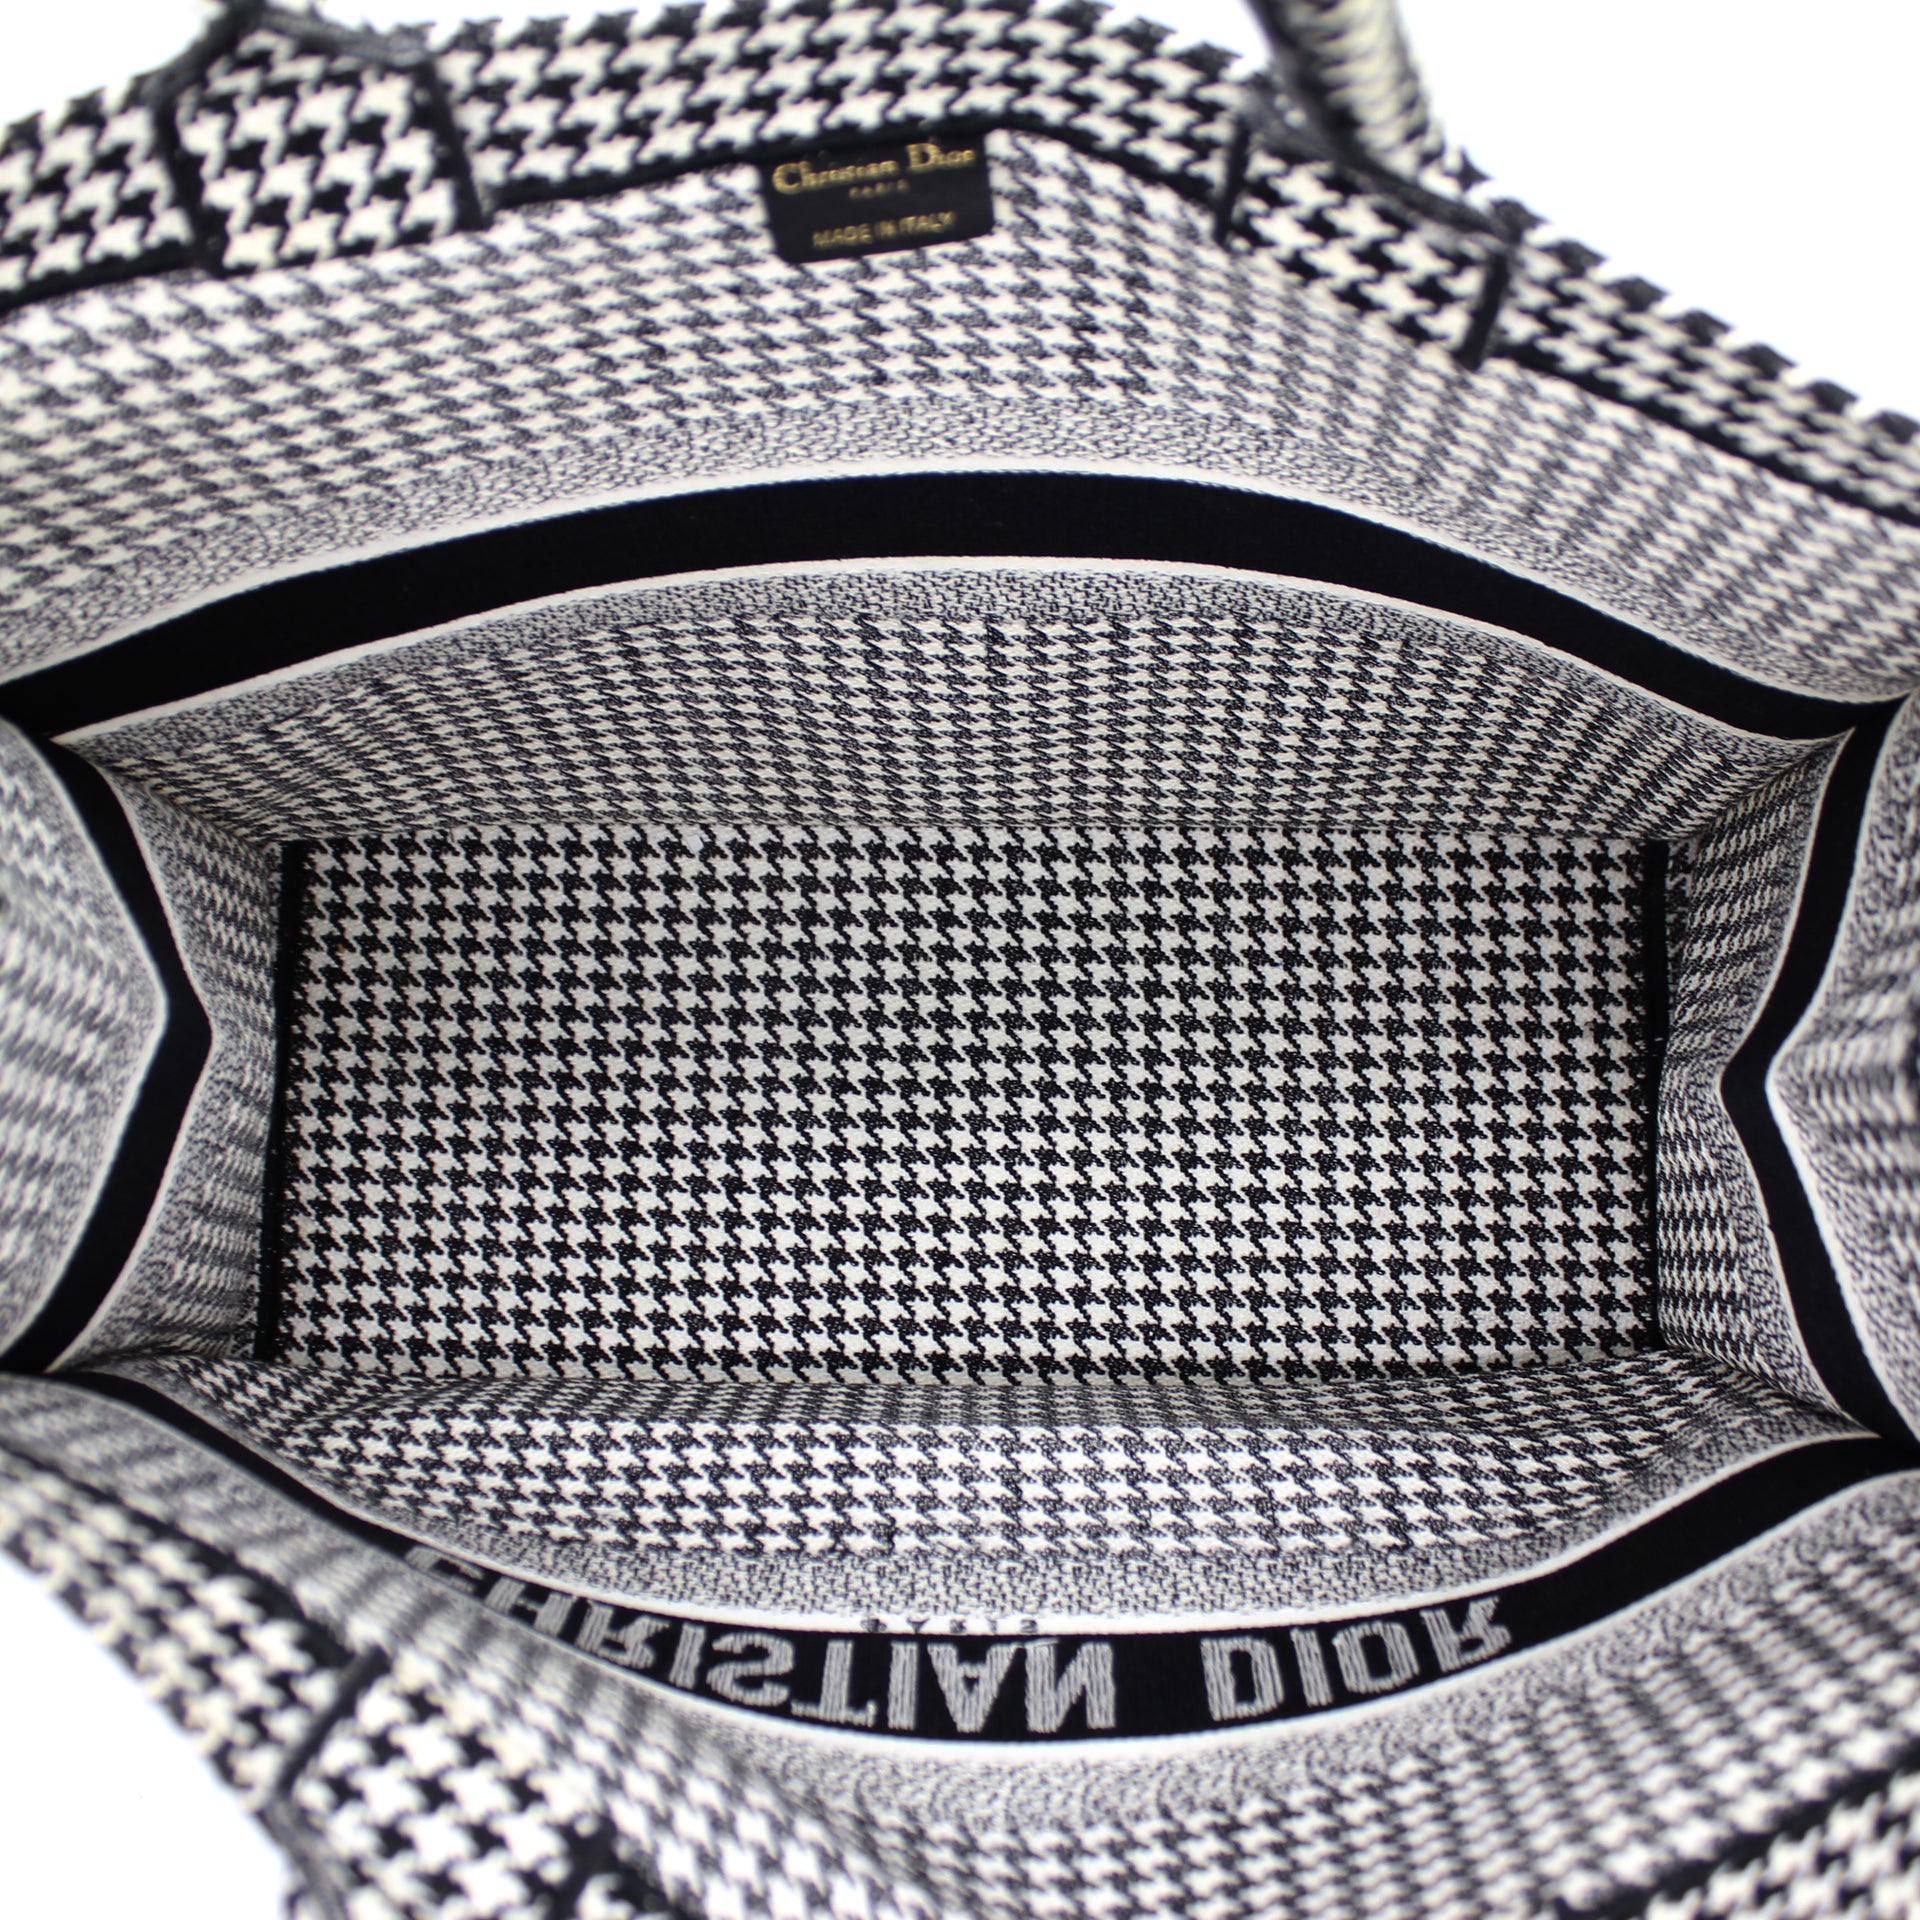 Houndstooth Embroidered Book Tote